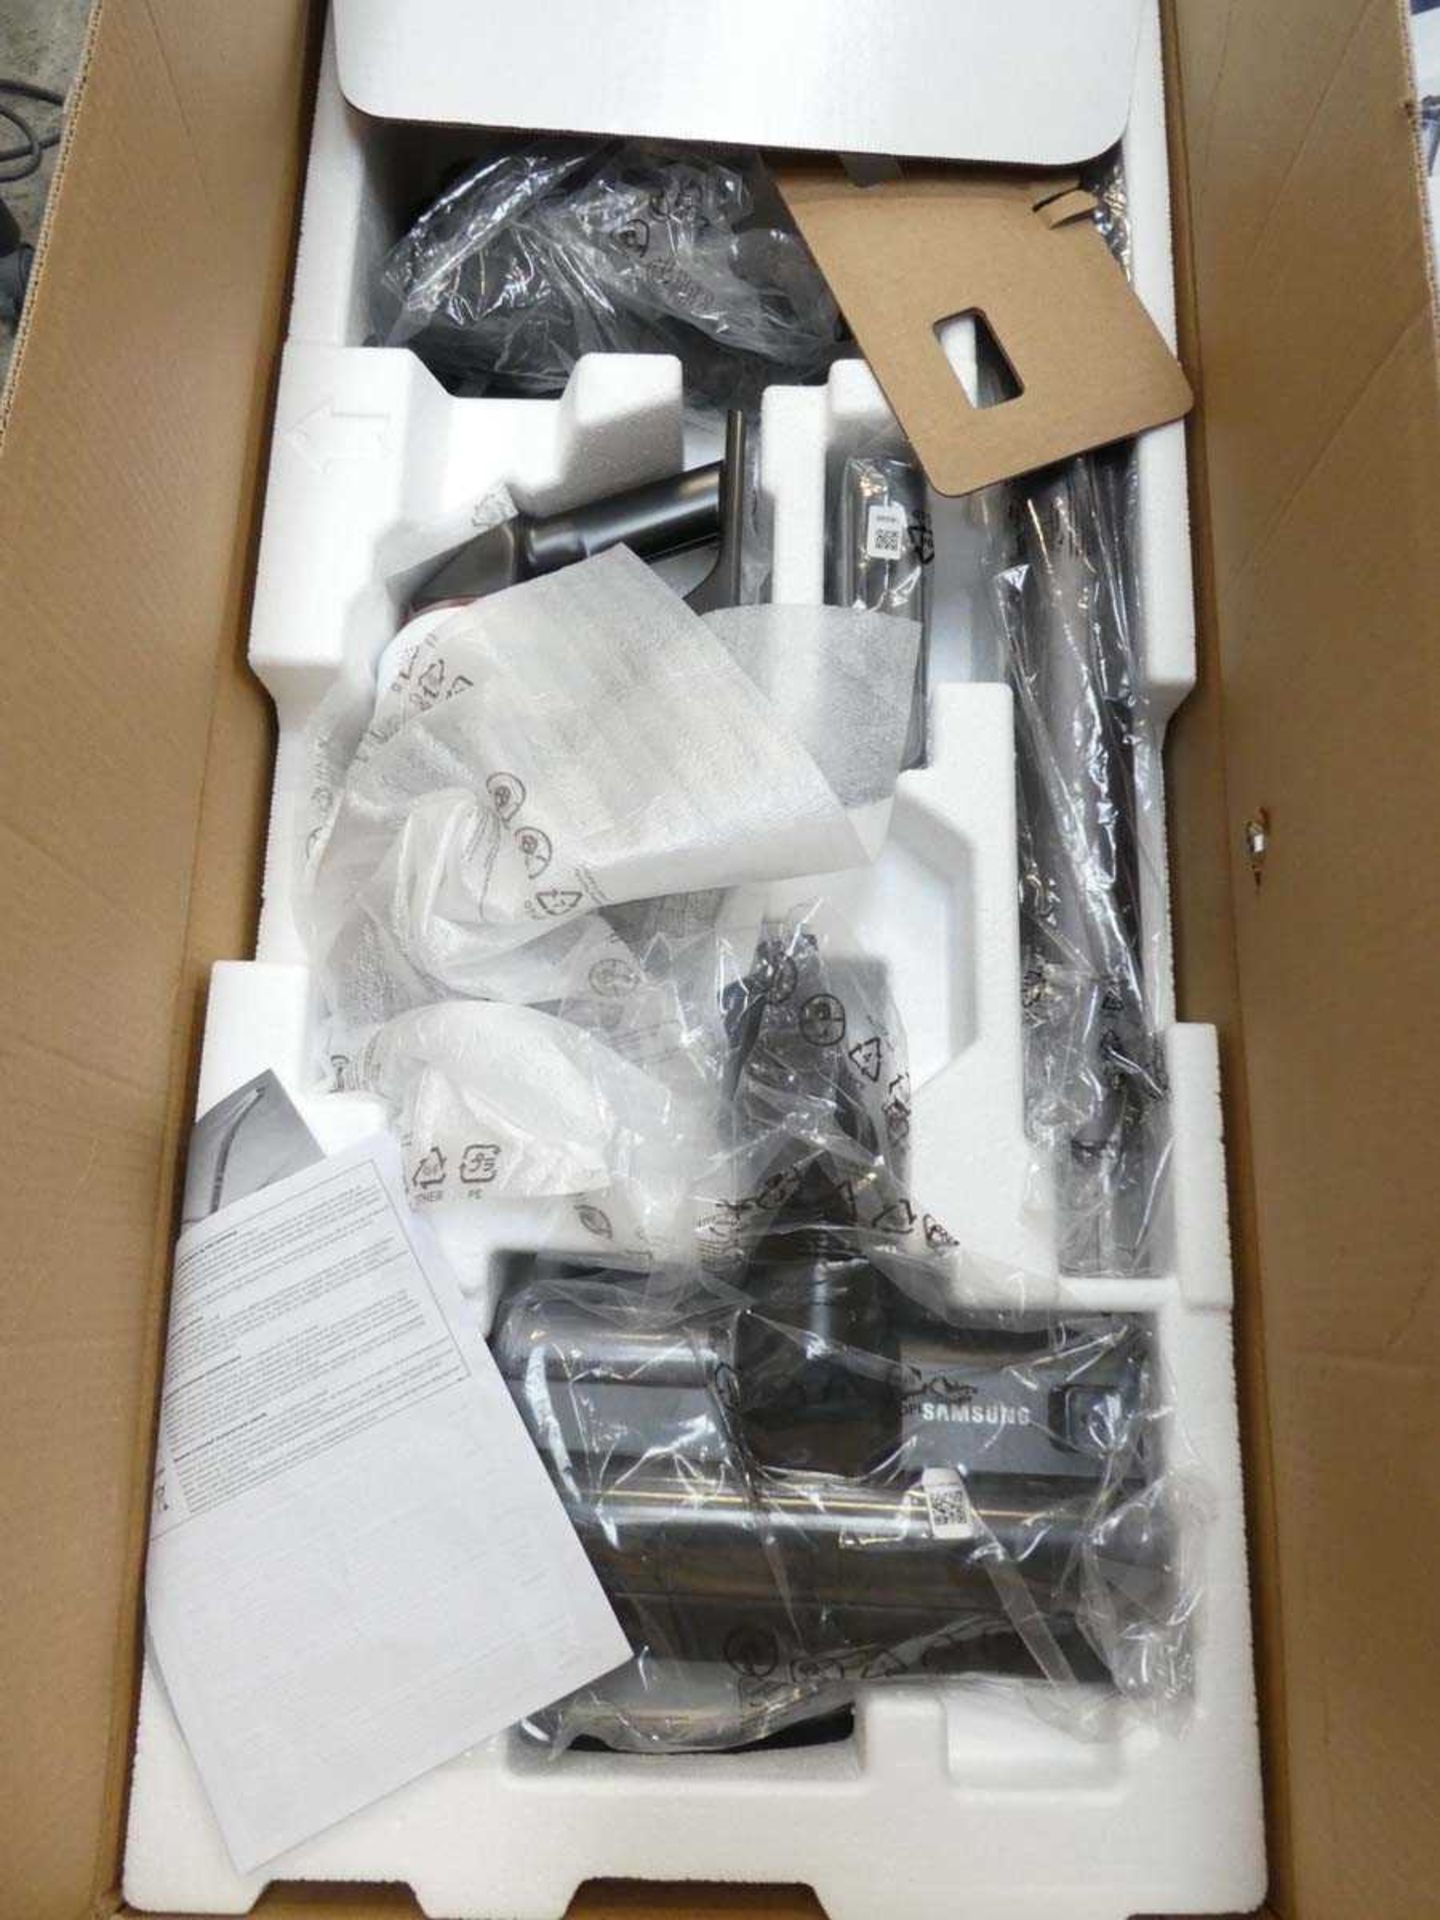 +VAT Boxed Samsung Bespoke Jet vacuum cleaner with battery and accessories - Image 2 of 2